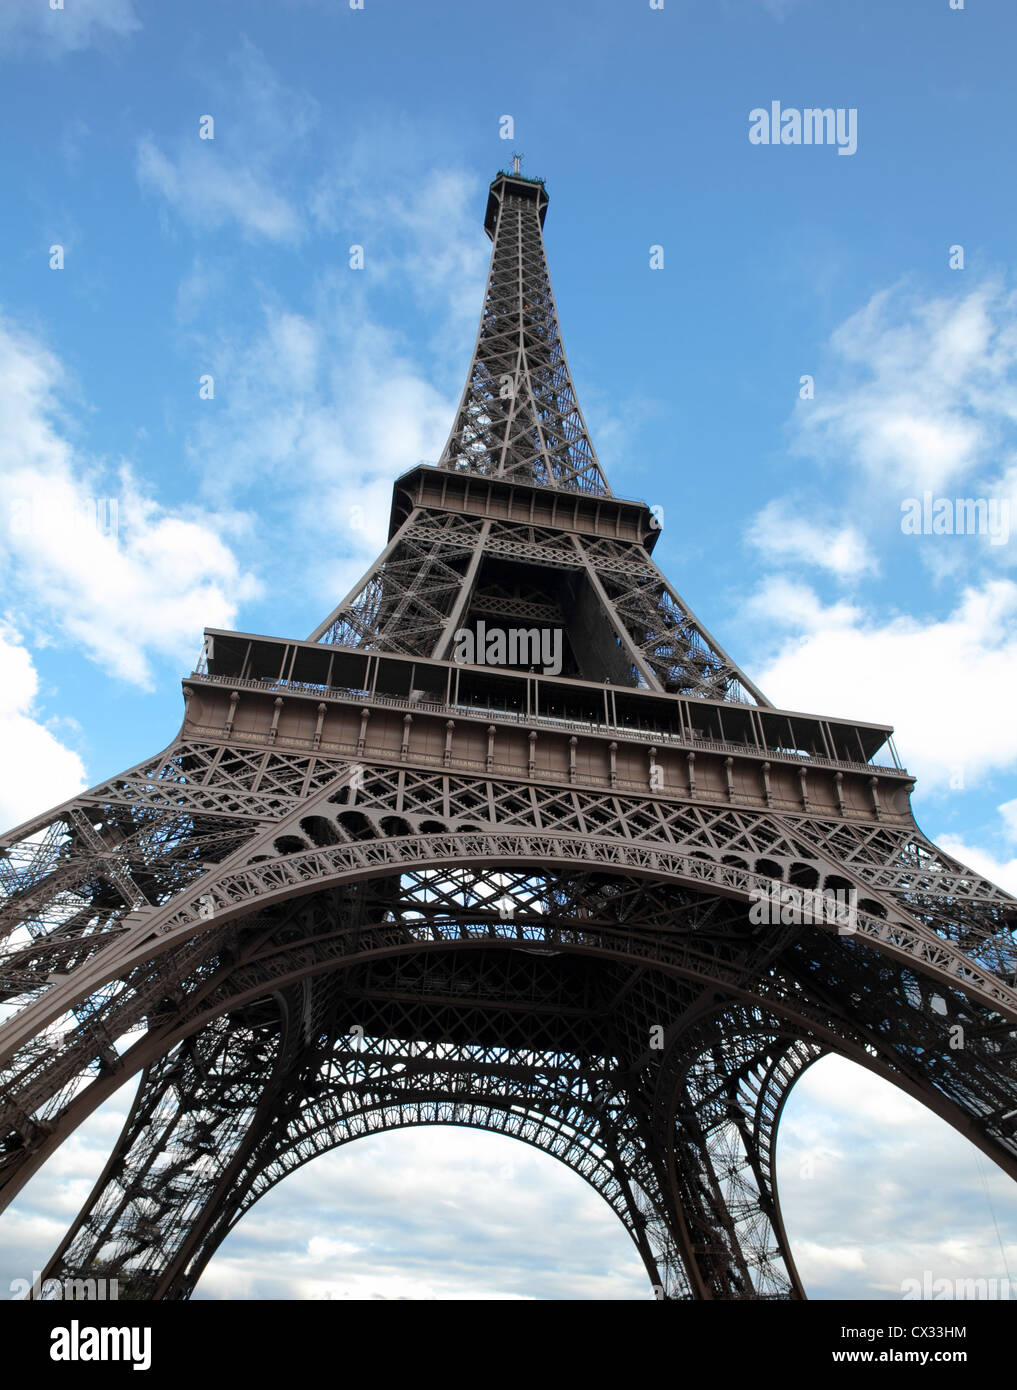 Eiffel tower in Paris wide angle shot Stock Photo